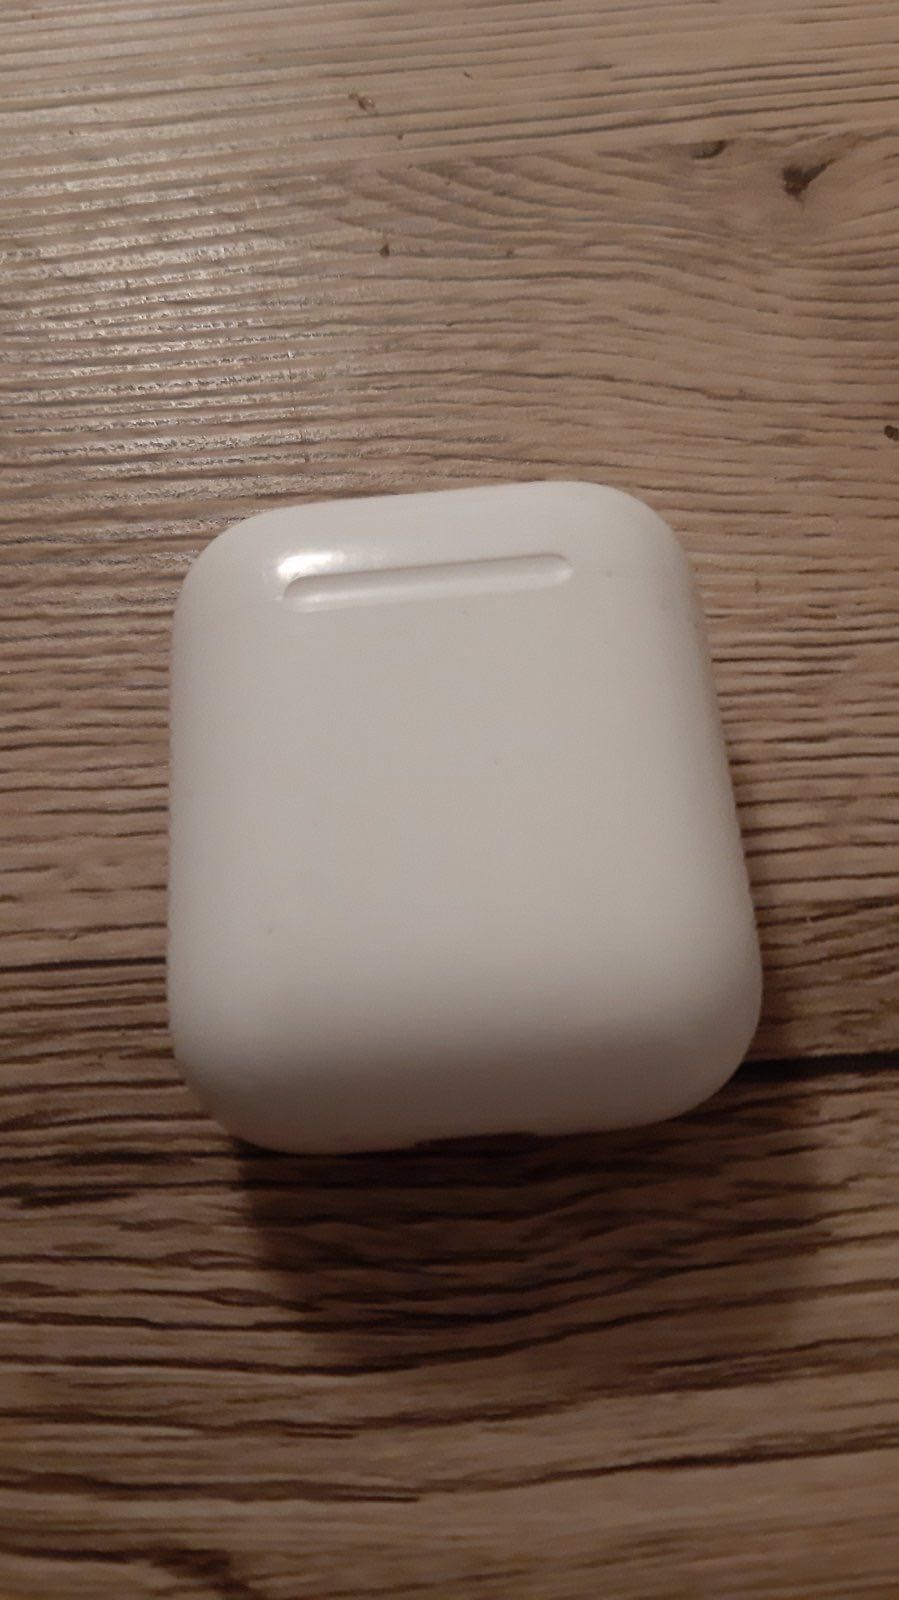 Apple Airpods 2 gen Oryginalne A2031